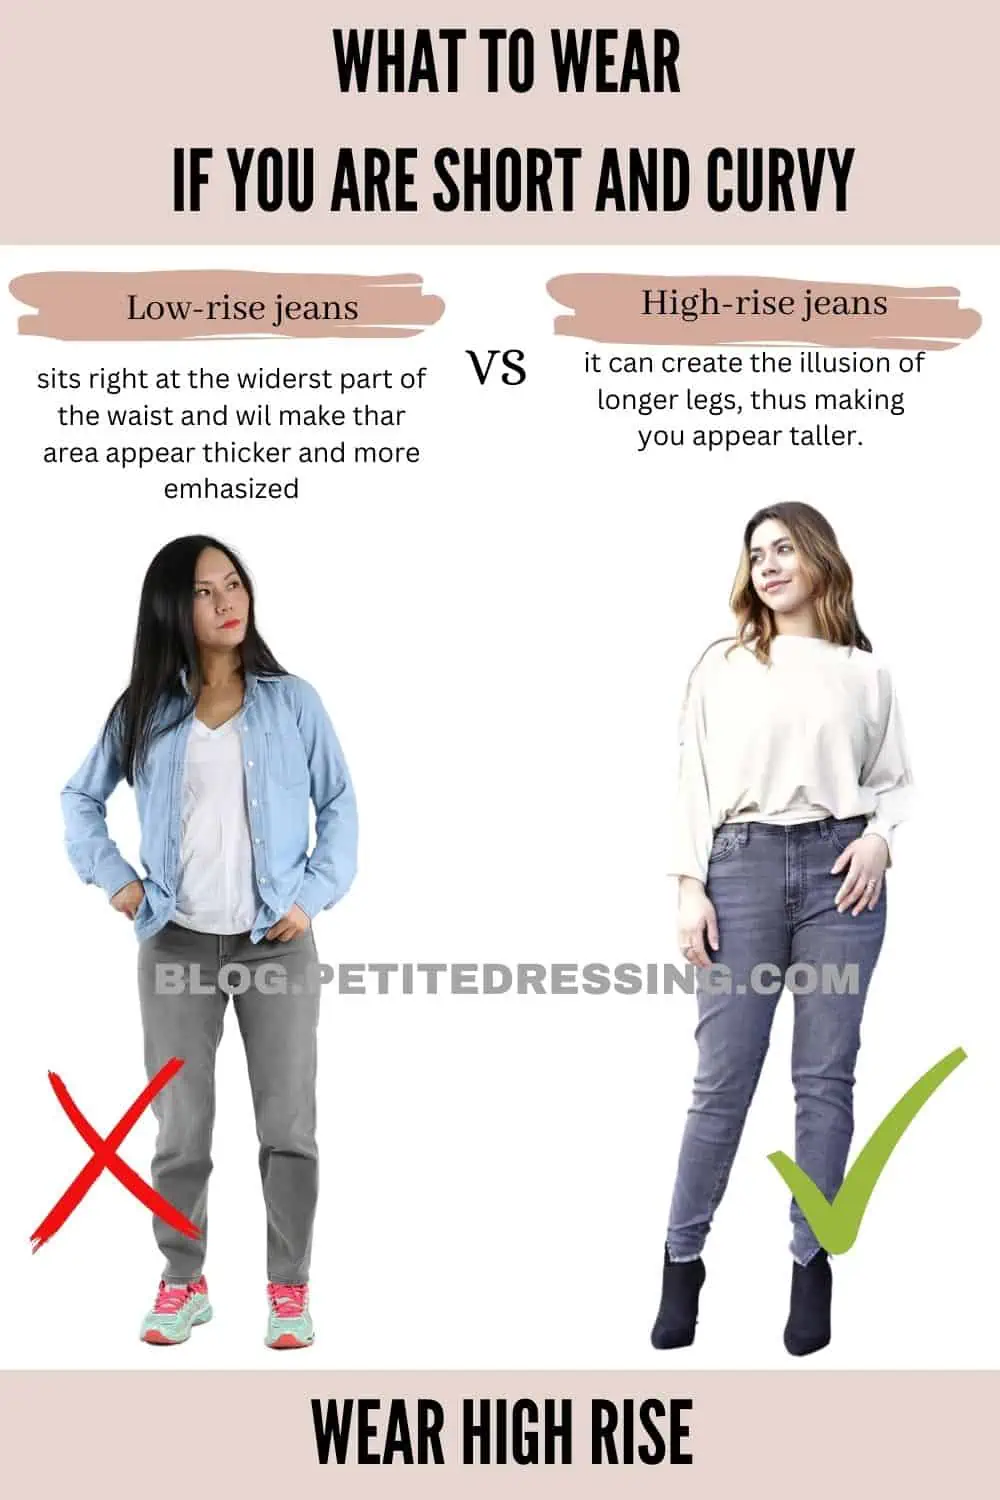 What Not to Wear if You're Short and Curvy - Petite Dressing